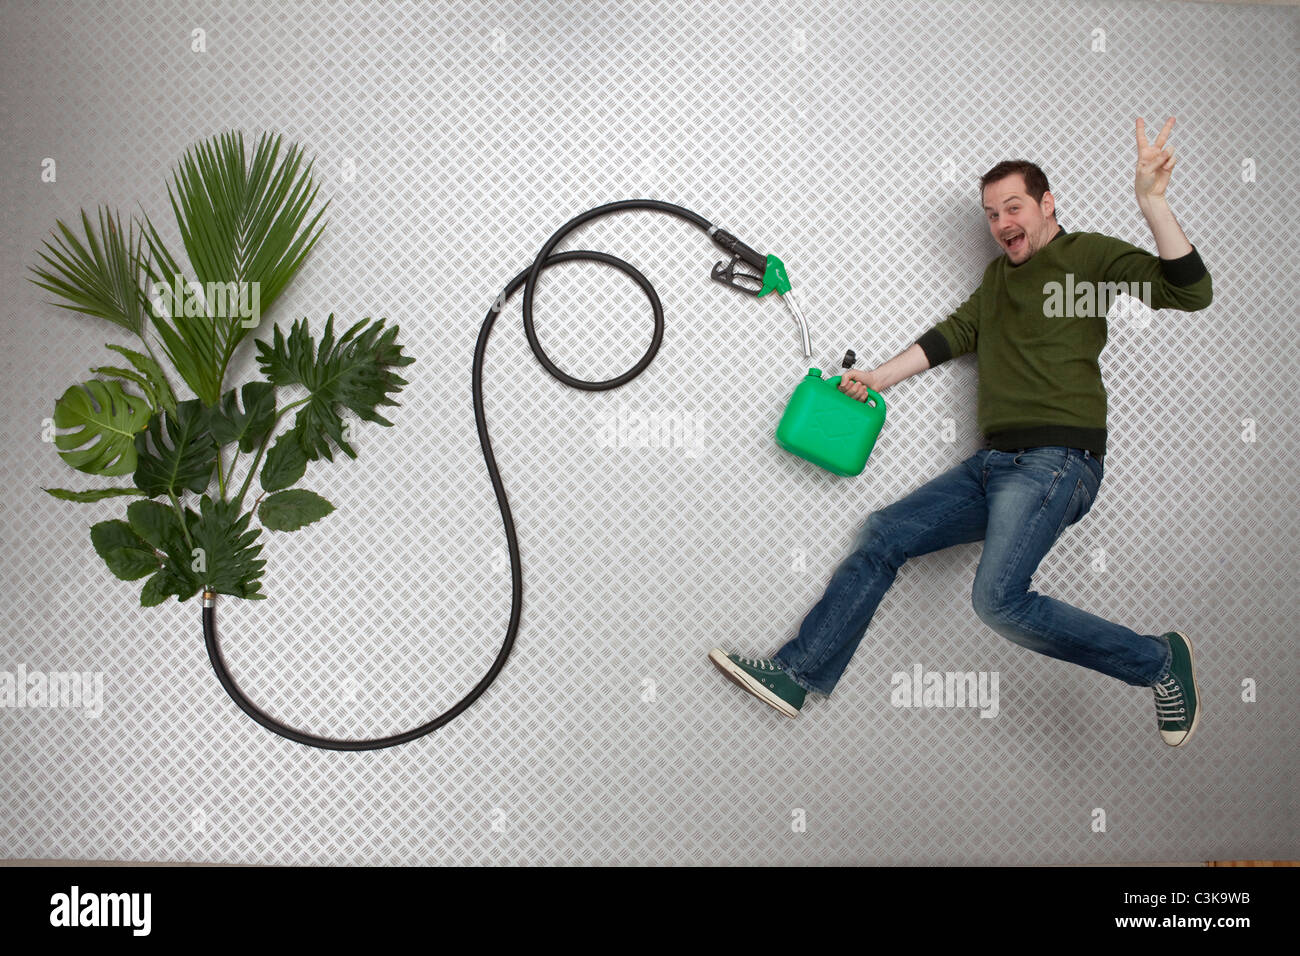 Mid adult man holding petrol can and hose connected to plant Stock Photo